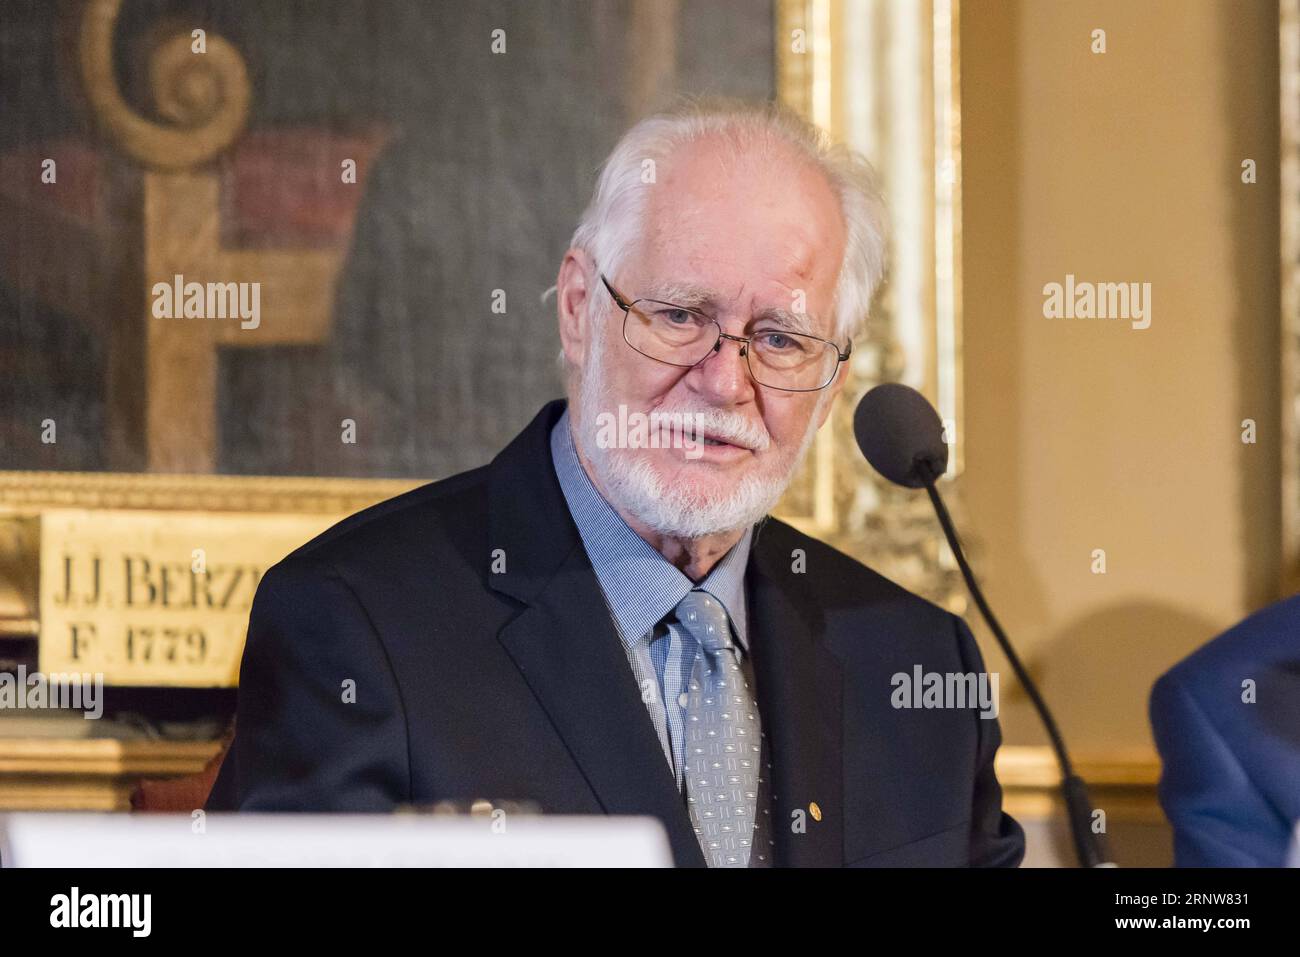 (171207) -- STOCKHOLM, Dec. 7, 2017 -- Nobel laureate in Chemistry Jacques Dubochet attends a press conference at the Royal Swedish Academy of Sciences in Stockholm, Sweden, Dec. 7, 2017. The laureates will receive the prize during an official Nobel Prize award ceremony on Dec. 10. ) (lrz) SWEDEN-STOCKHOLM-NOBEL-PRESS CONFERENCE ShixTiancheng PUBLICATIONxNOTxINxCHN Stock Photo